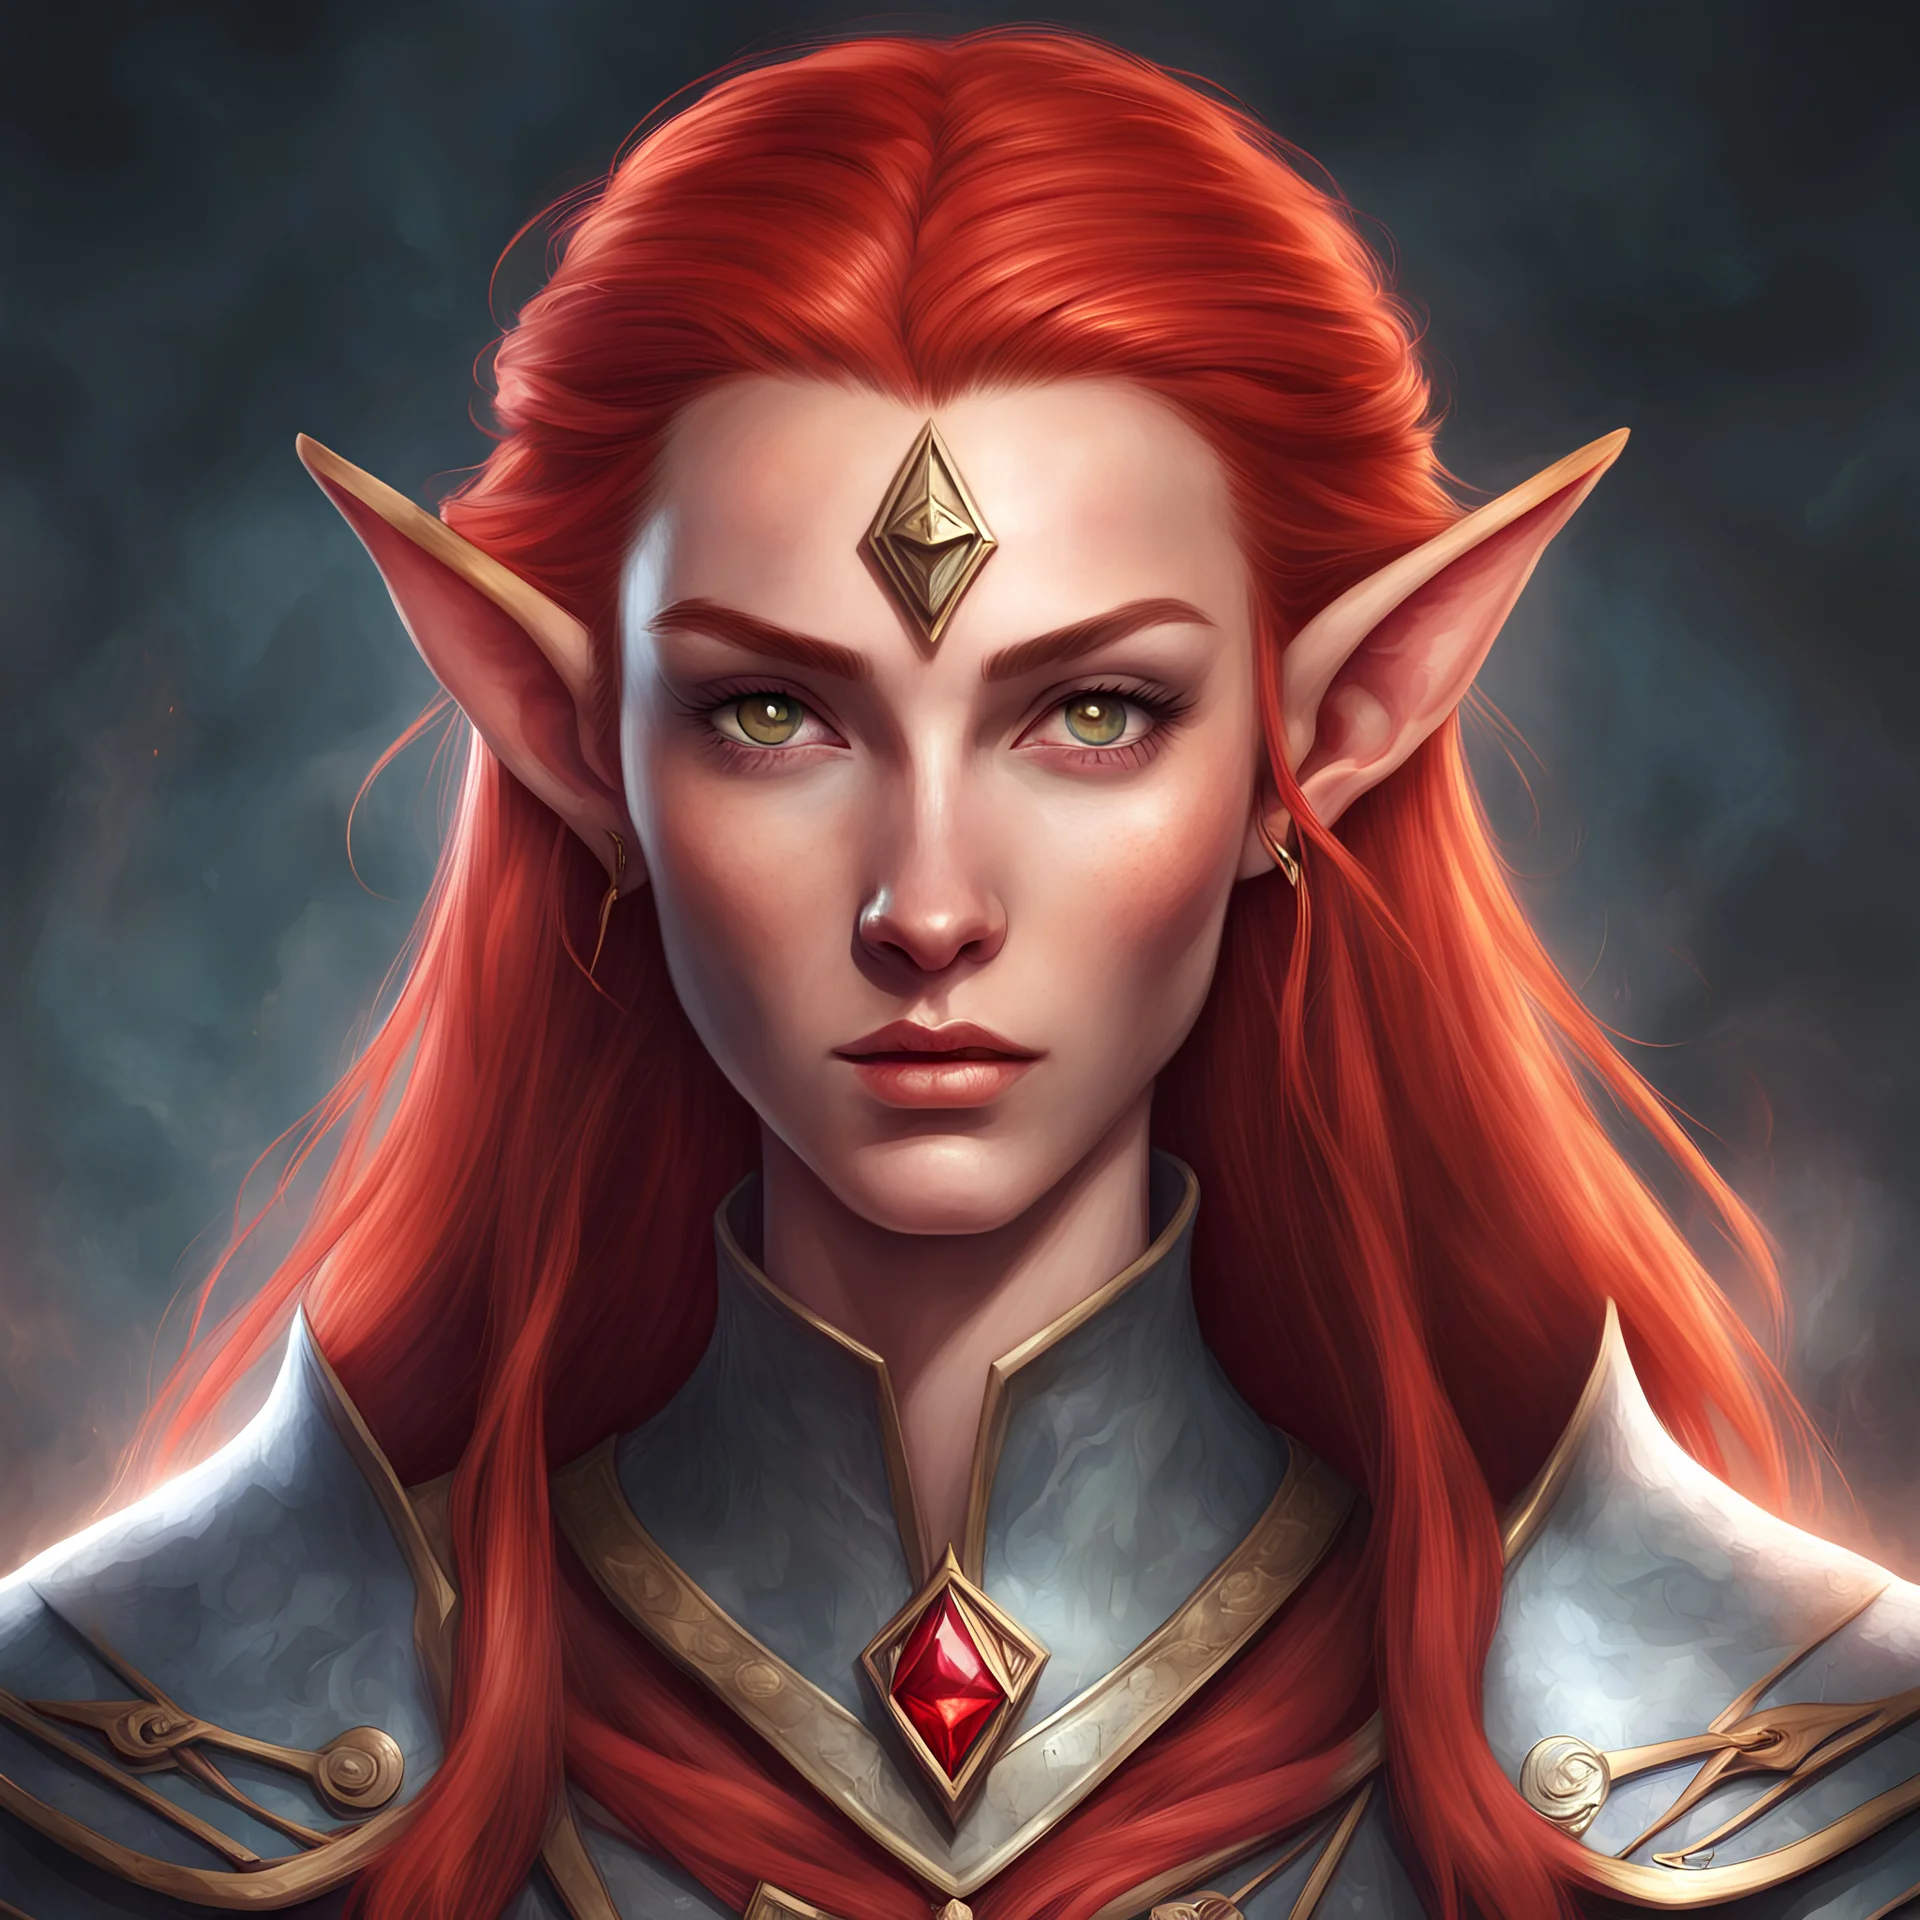 Generate a dungeons and dragons character portrait of the face of a female high elf wizard with red hair. She is wearing a beautiful amulet around her neck with a red stone in the middle. She gains power from this amulet, but the amulet also takes a bit of her life force each time. She is wielding powerful magic.